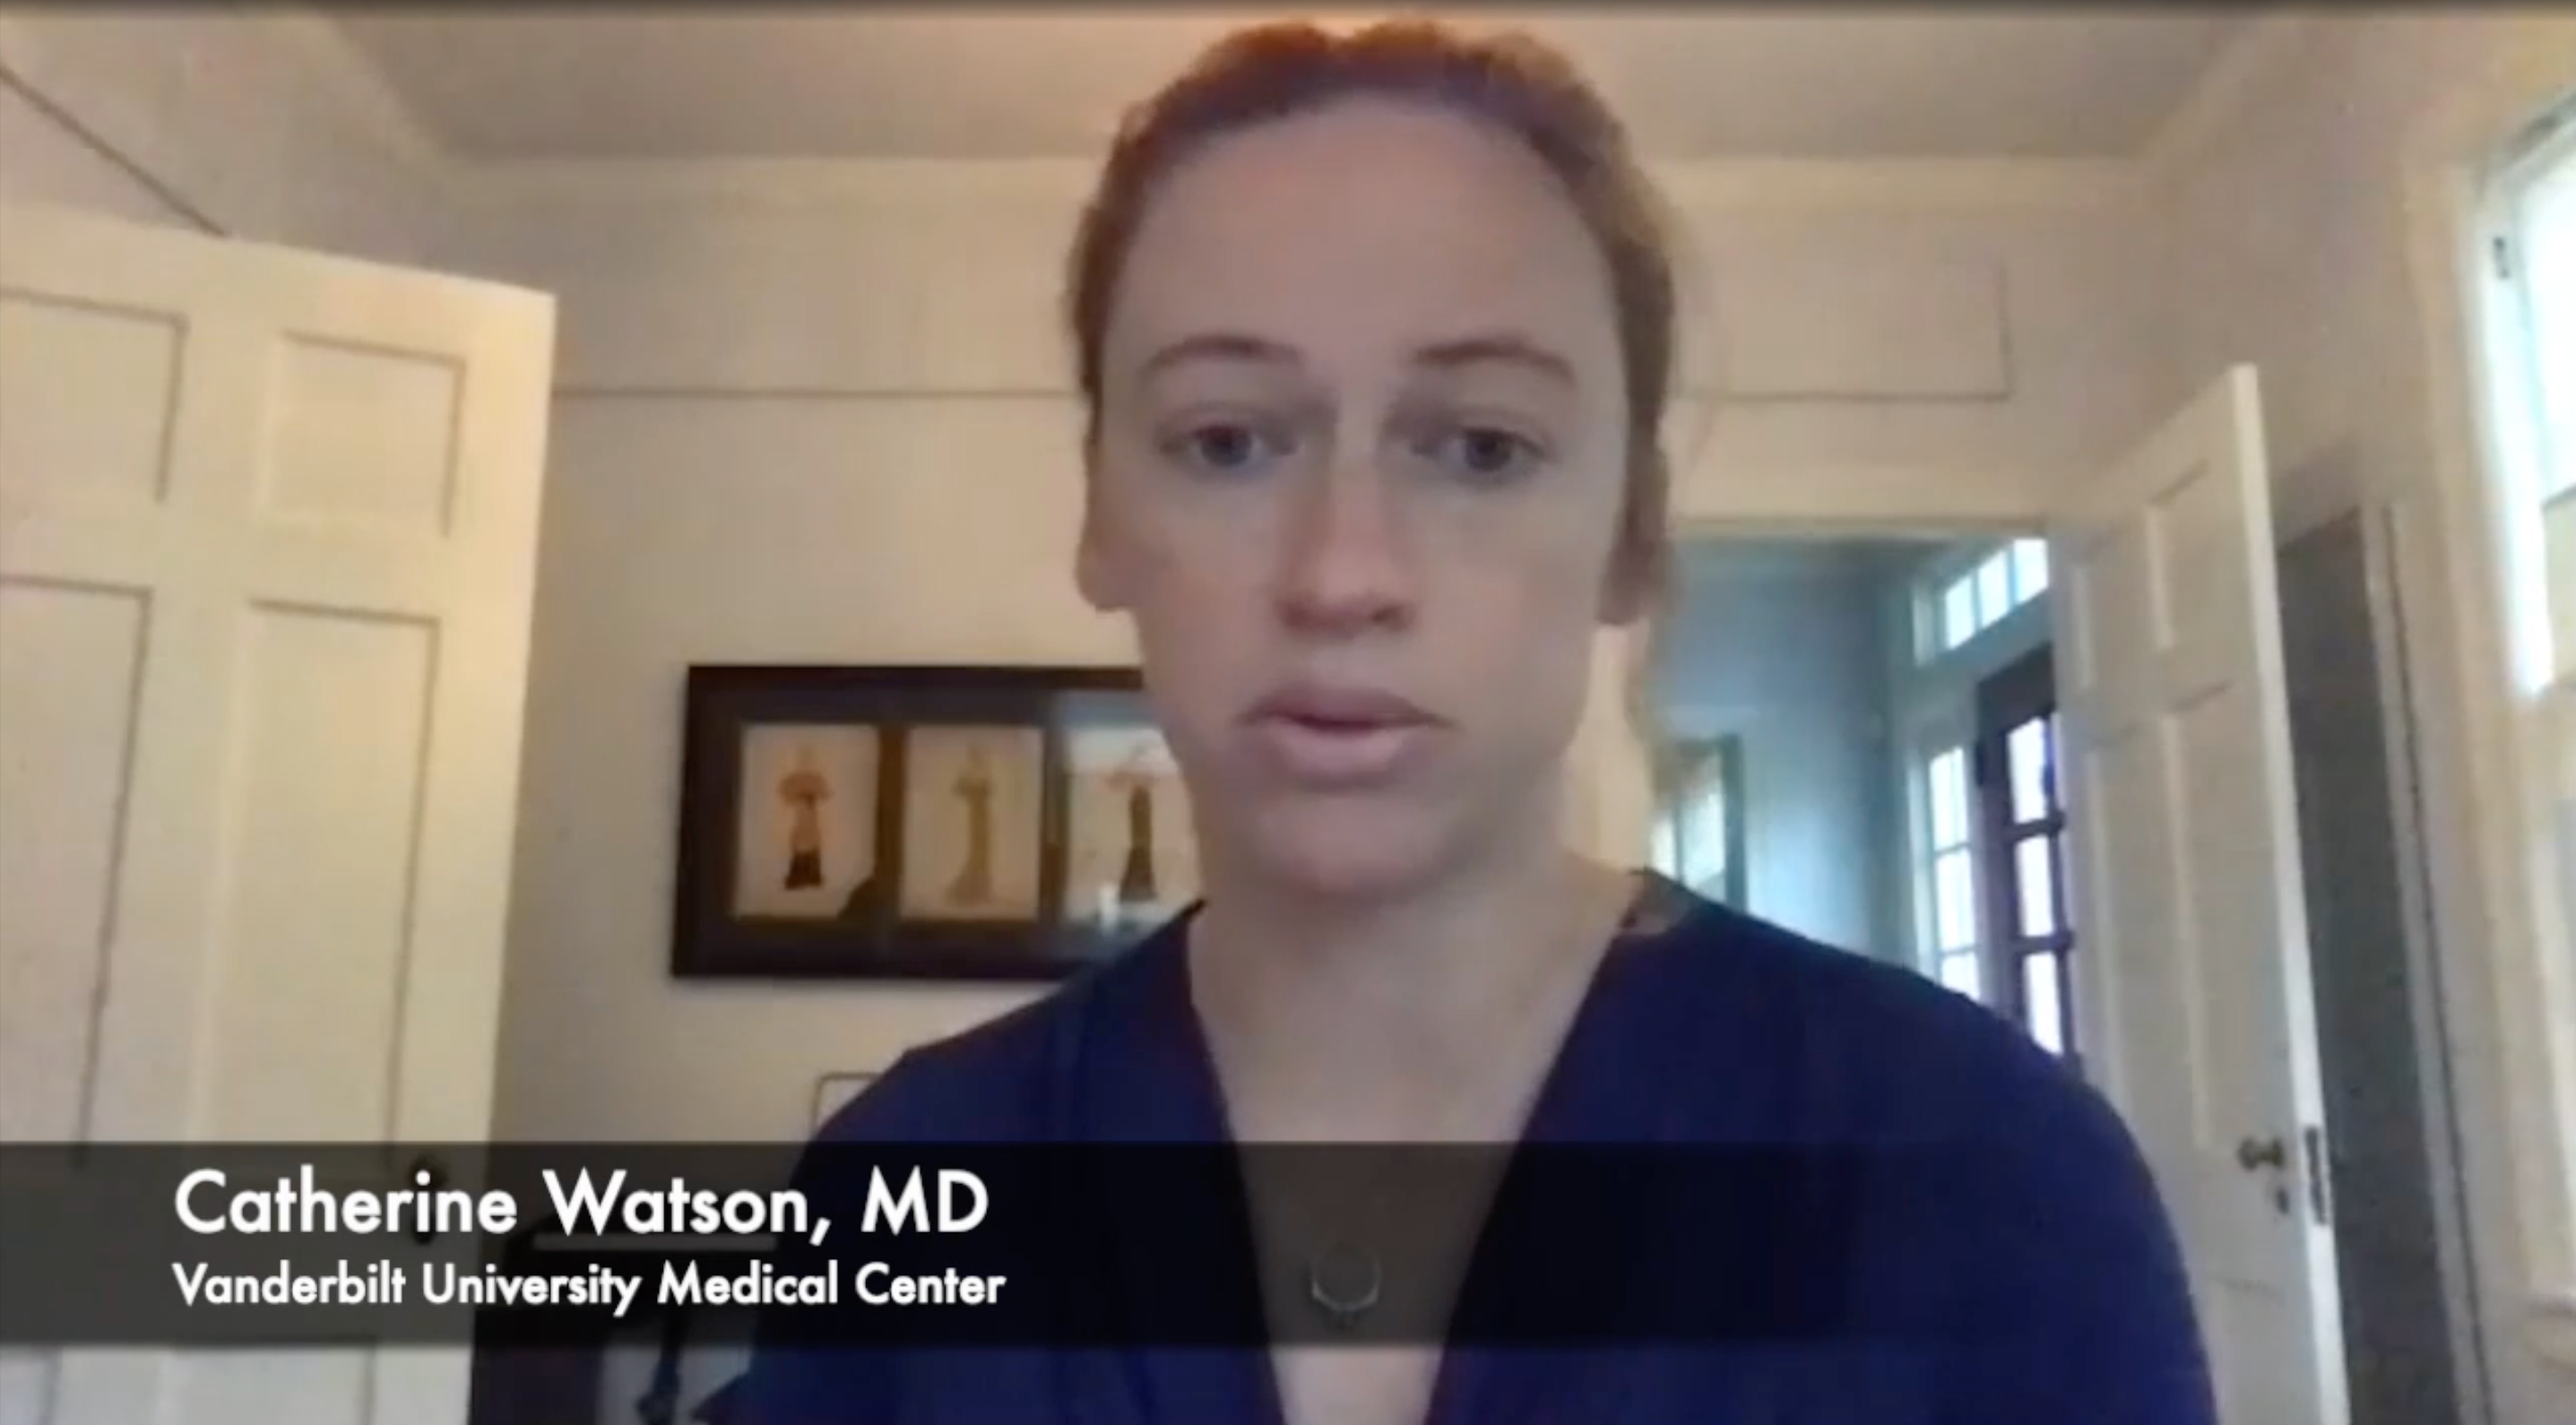 Catherine Watson, MD, discussed the main results and key takeaway from a trial analyzing streamlined and traditional education practices for patients with ovarian cancer.